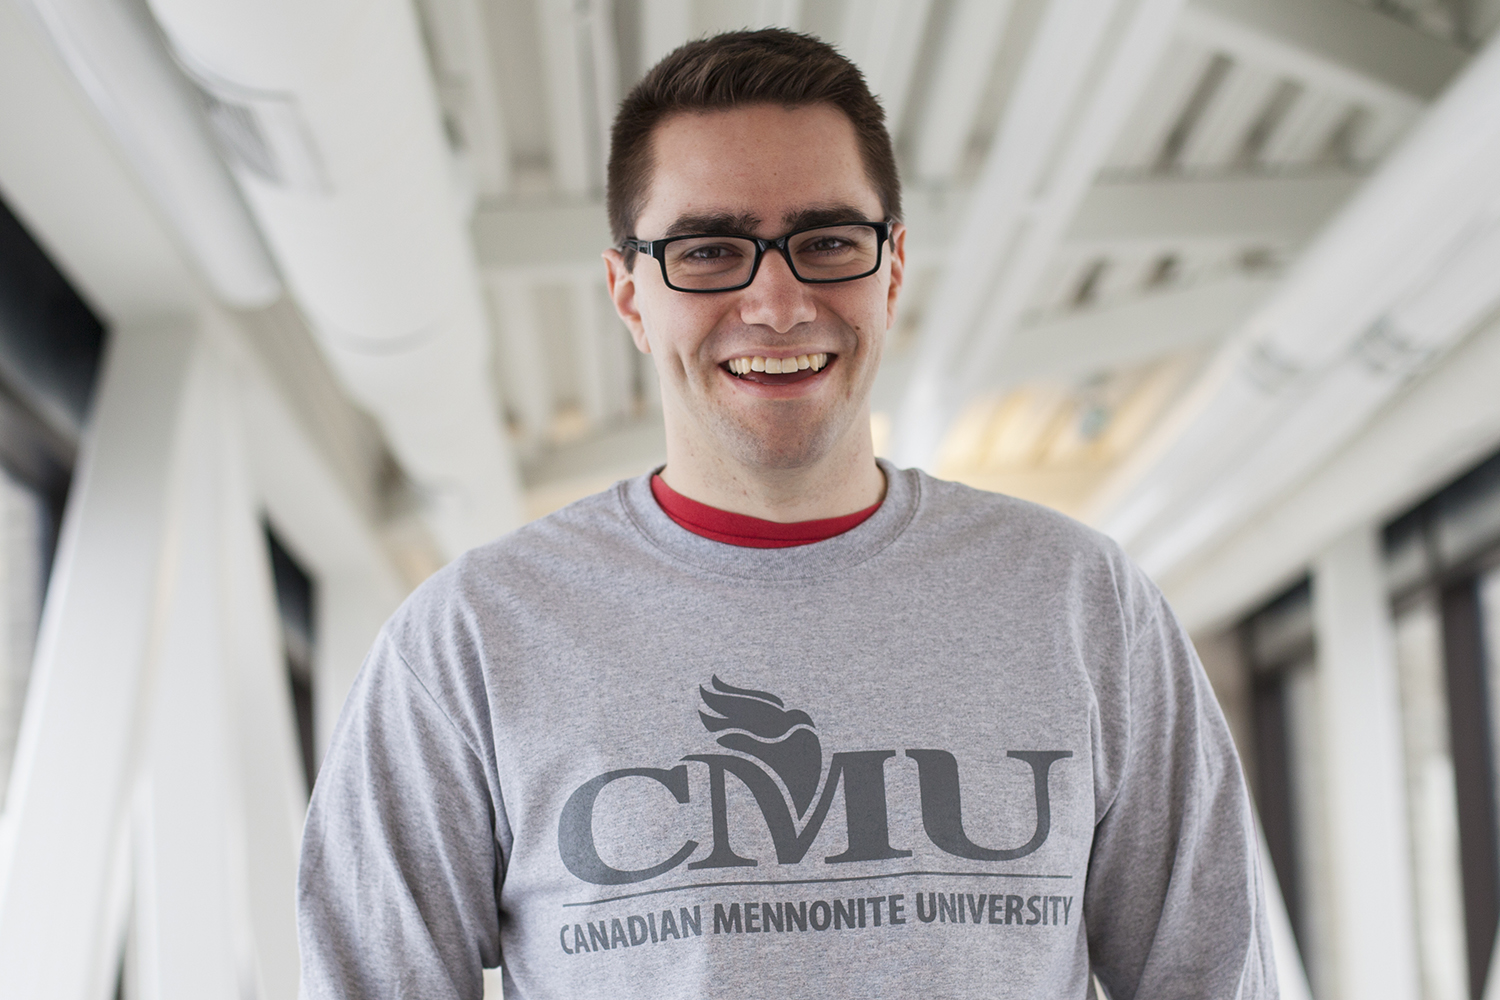 Jason Friesen - The courage to be vulnerable (Portrait of Jason Friesen on the Marpeck bridge wearing a grey long sleeved t-shirt with the CMU logo across the chest.)